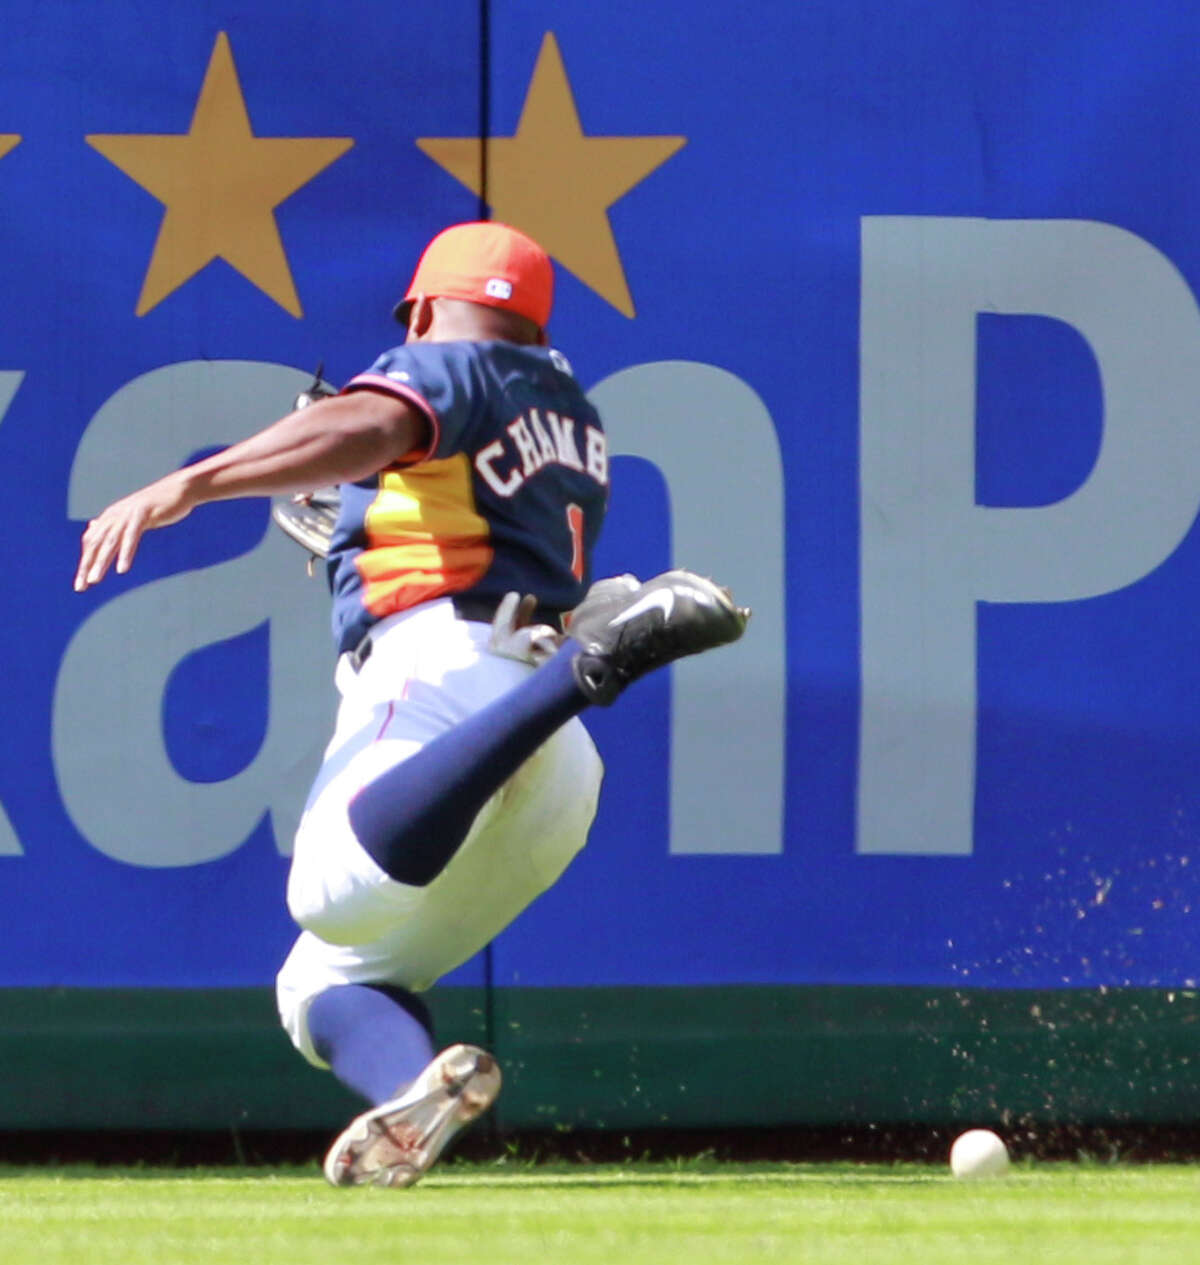 Center fielder Adron Chambers fails to come up with a hit by Veracruz's Jose Castillo in Sunday's 6-1 Astros victory in the exhibition finale.